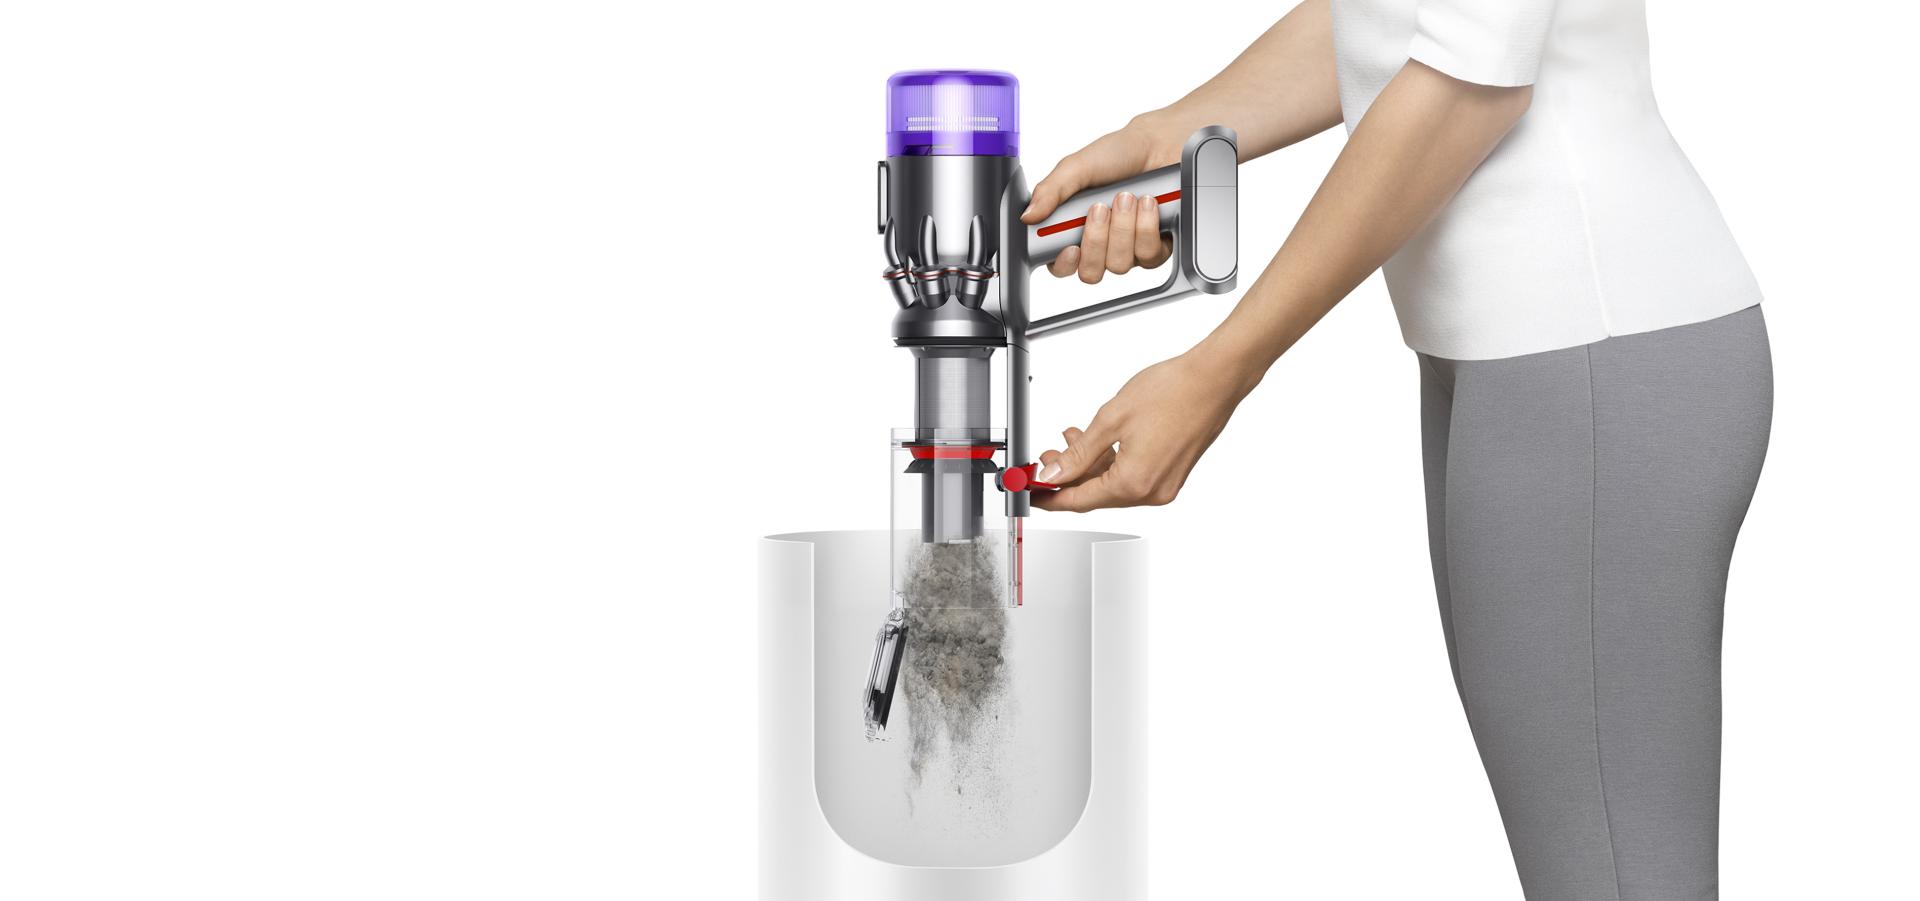 Dyson Humdinger handheld vacuum being emptied into a bin